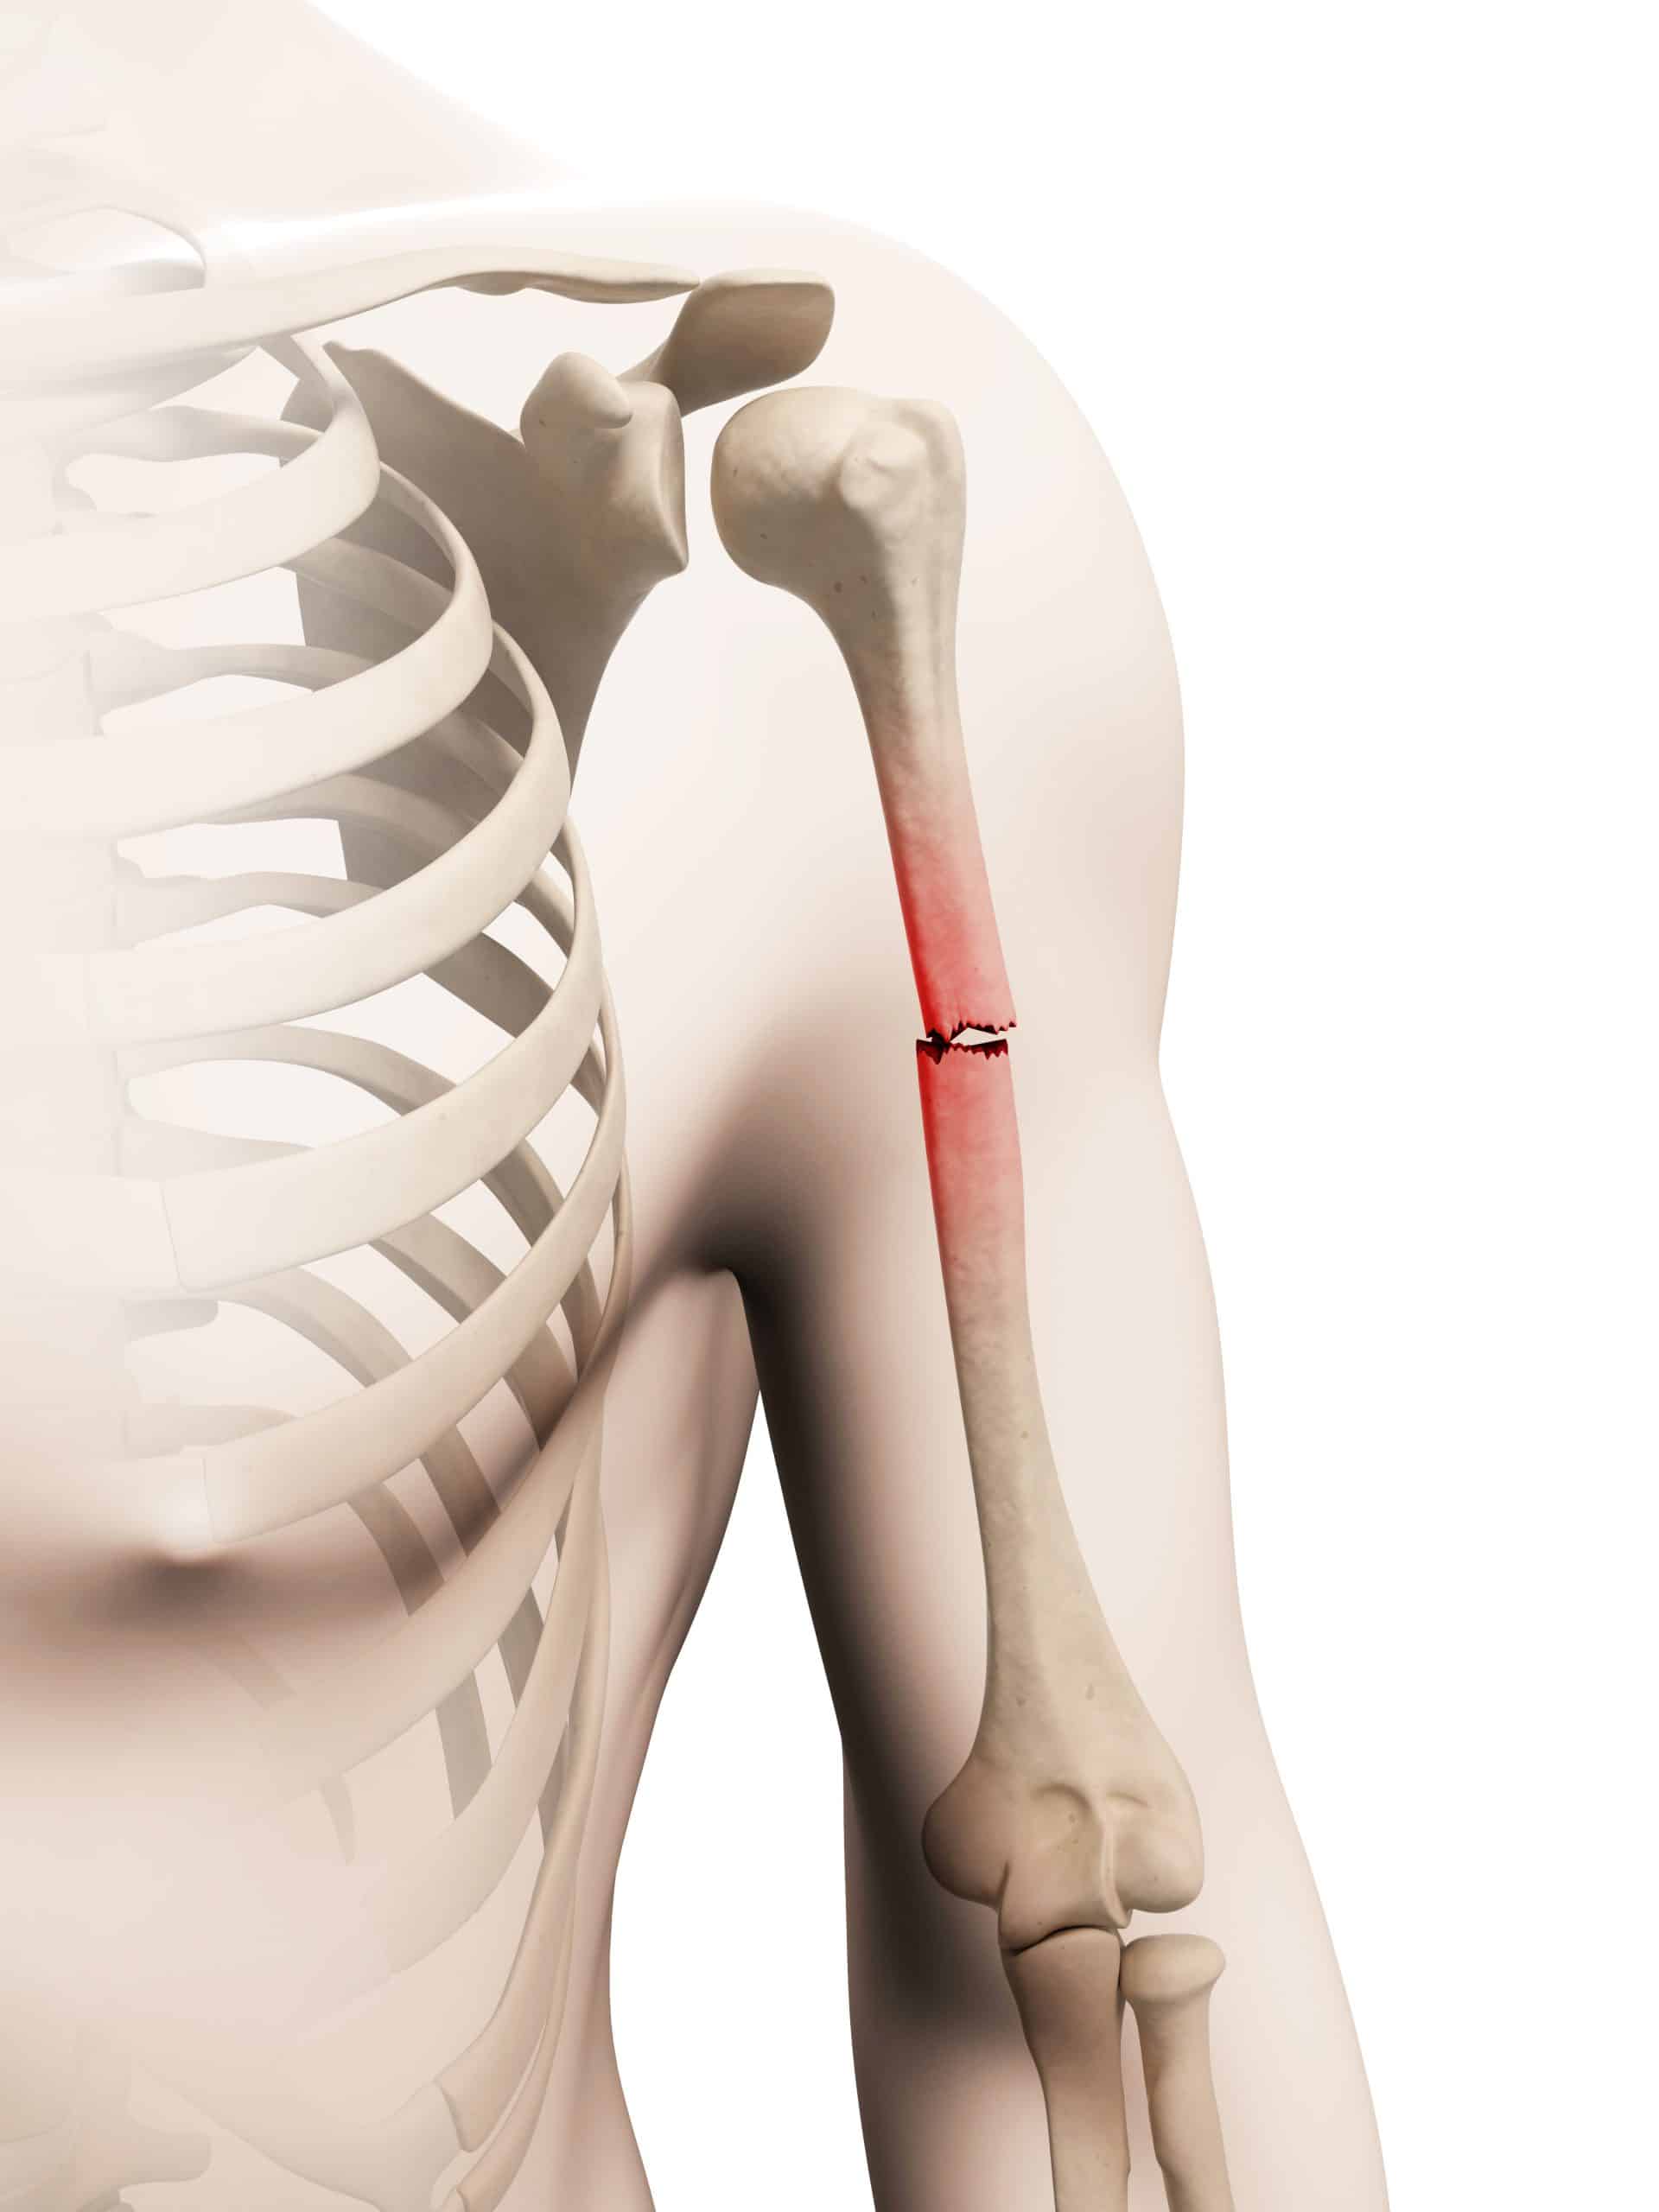 How Long Does It Take a Humerus Fracture To Heal? - Heiden Orthopedics